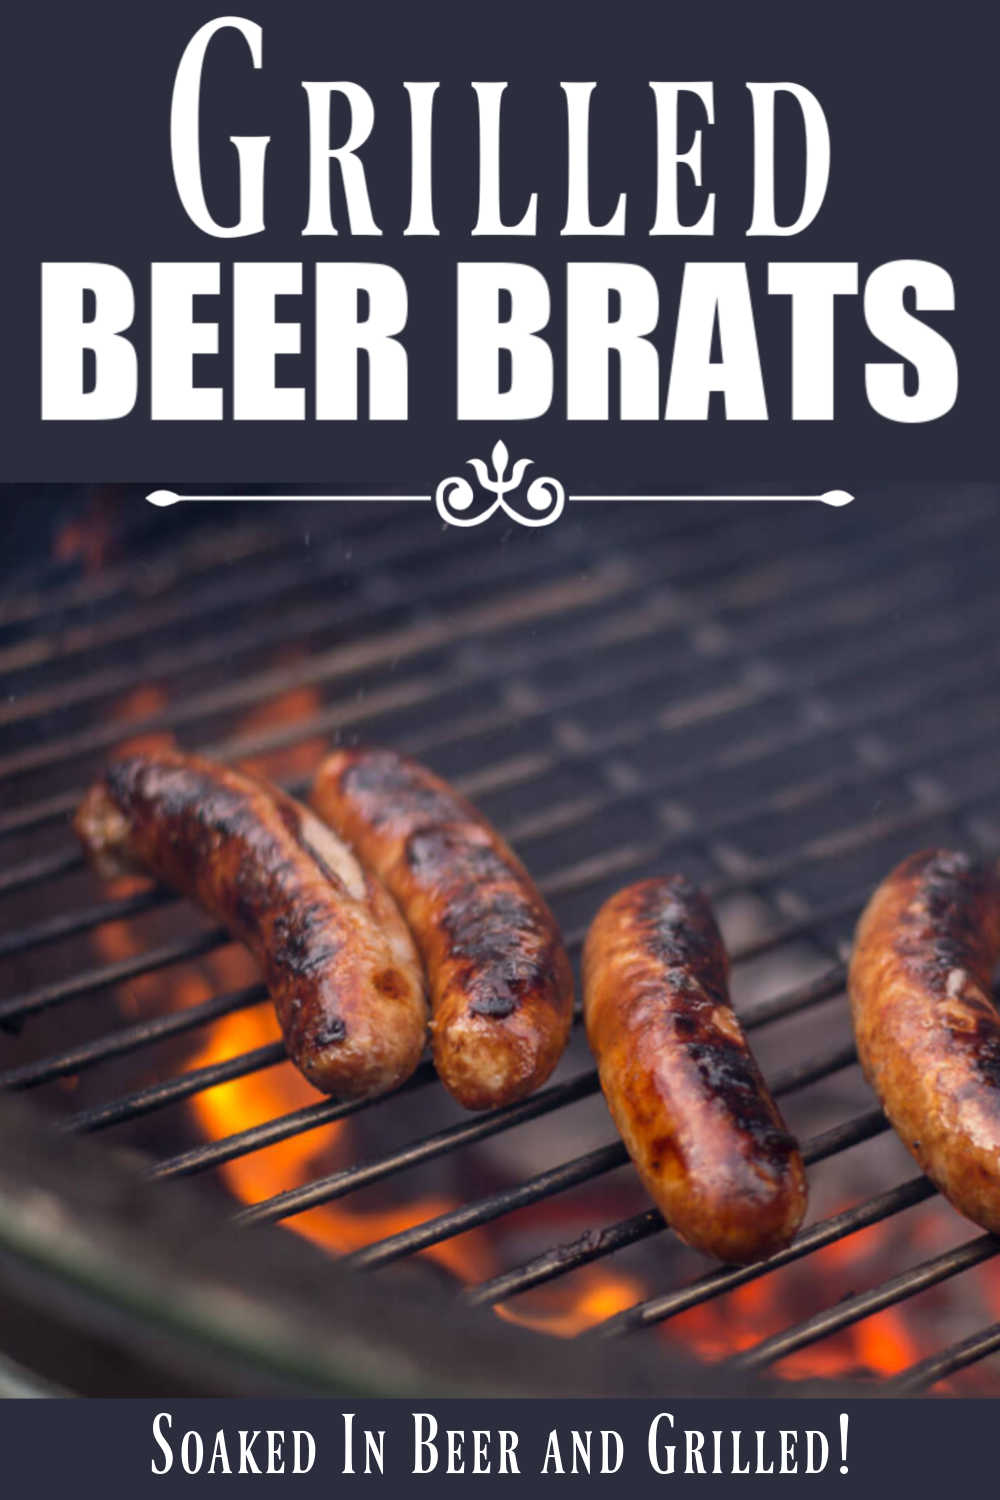 Amazing Grilled Beer Brats